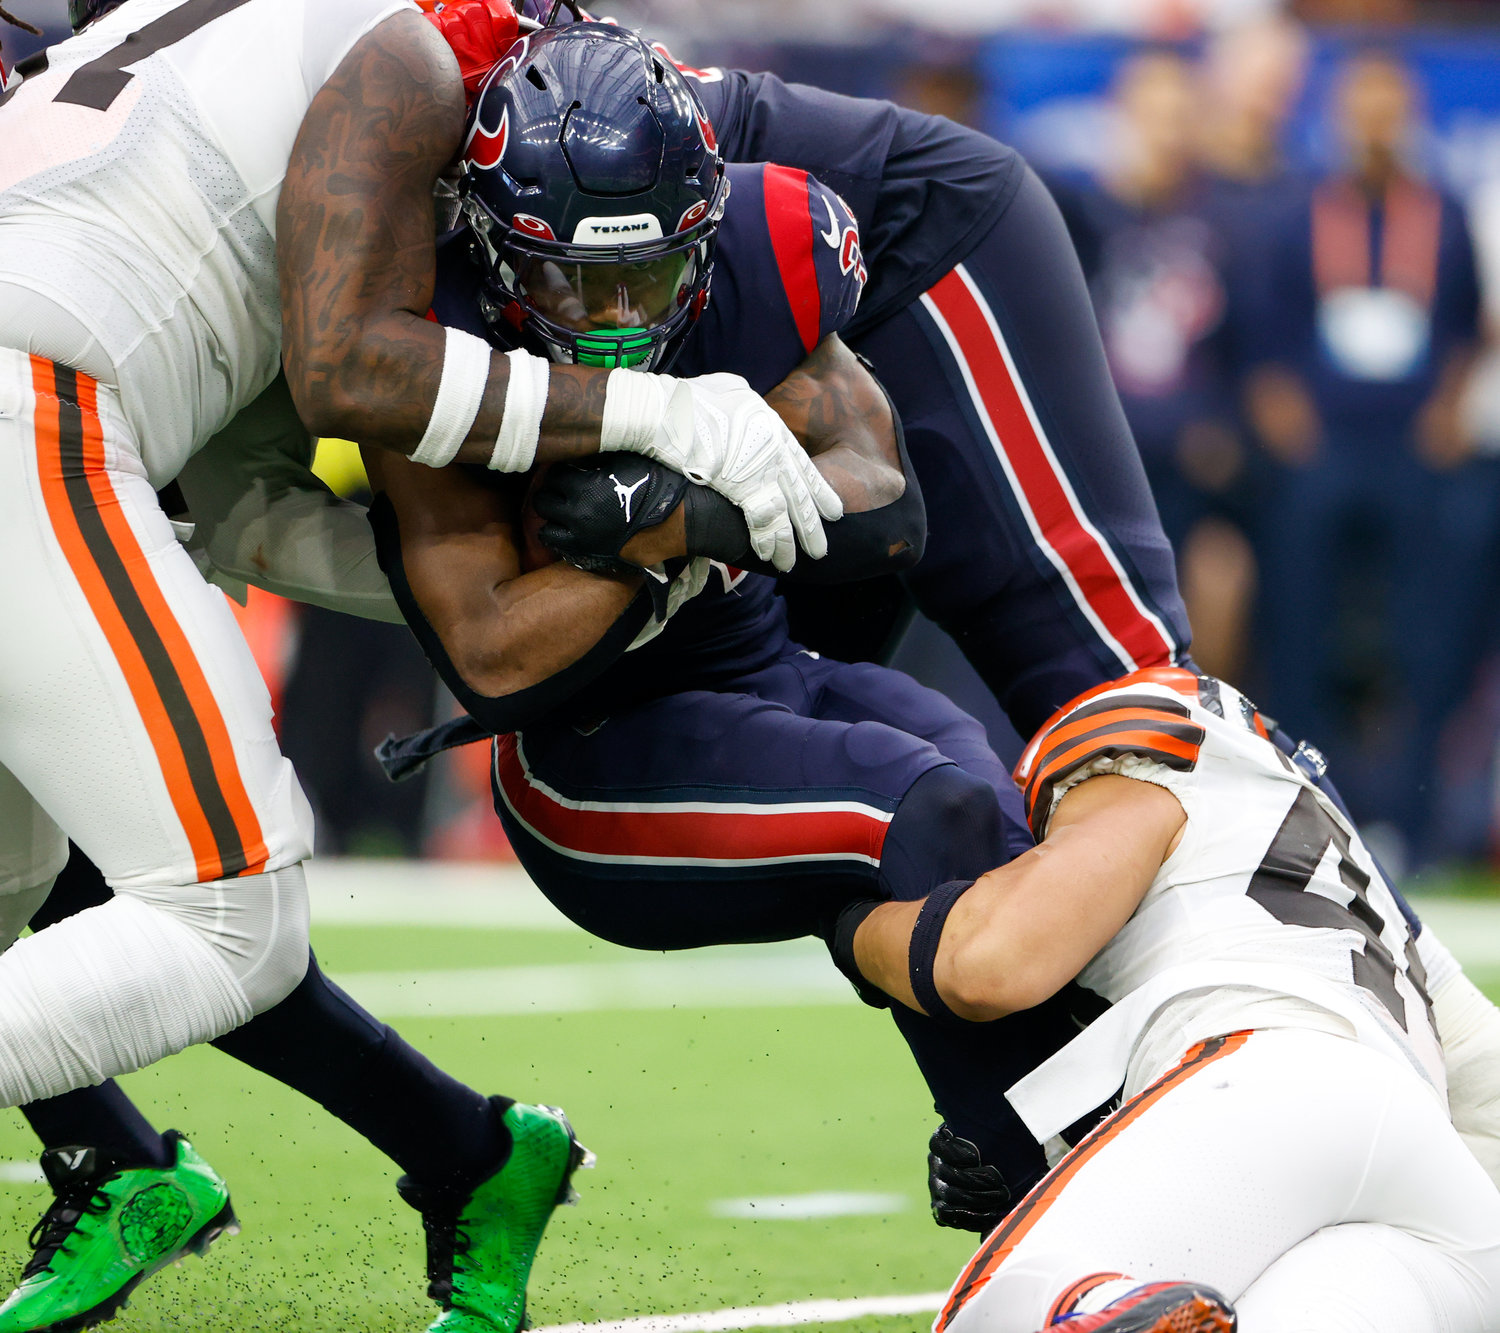 Houston Texans running back Dameon Pierce (31) is tackled on a carry during an NFL game between the Houston Texans and the Cleveland Browns on Dec. 4, 2022, in Houston. The Browns won, 27-14.